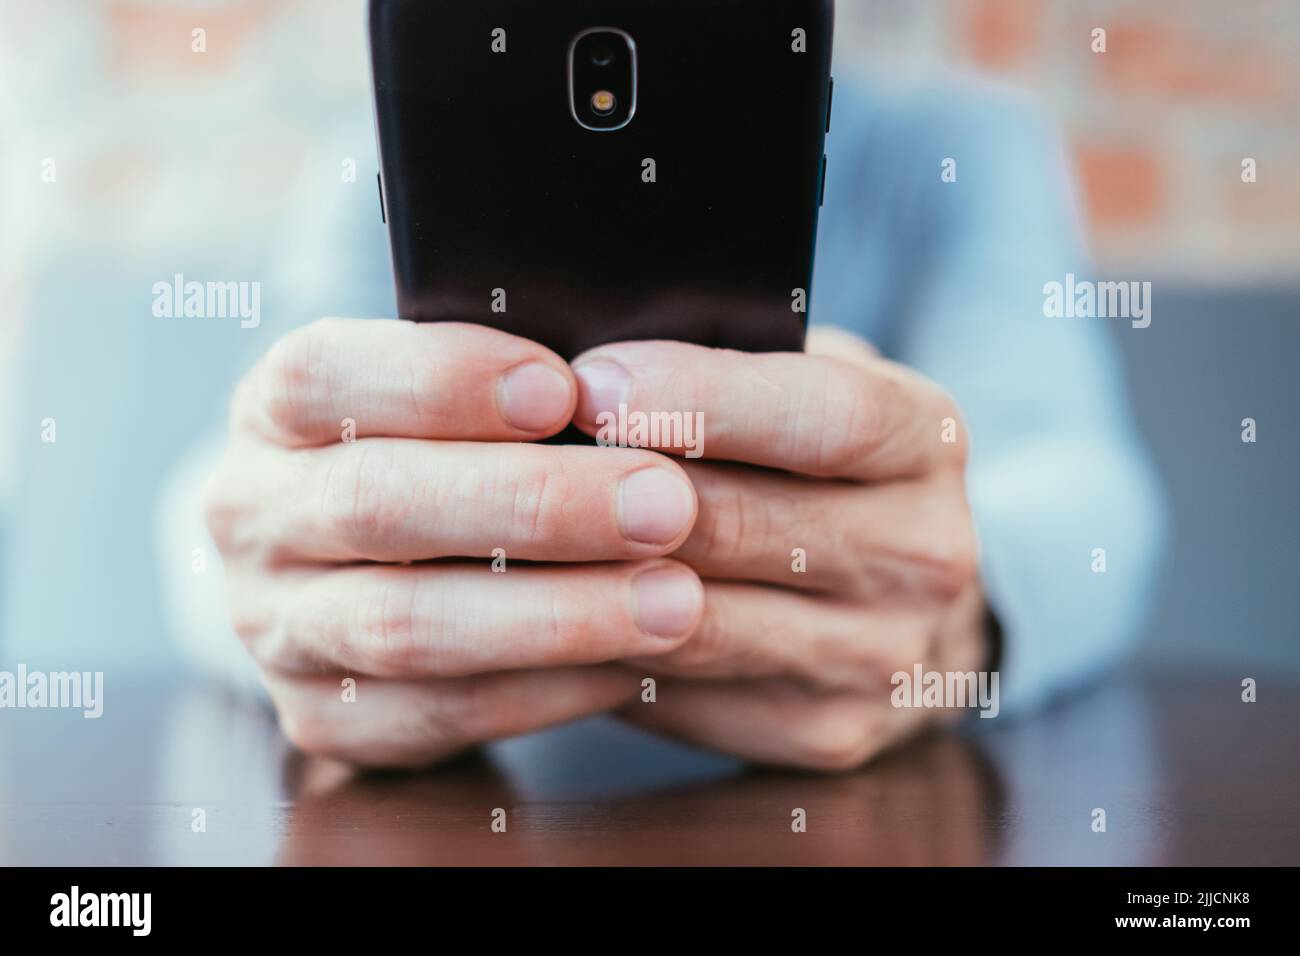 communication messaging texting social networking Stock Photo